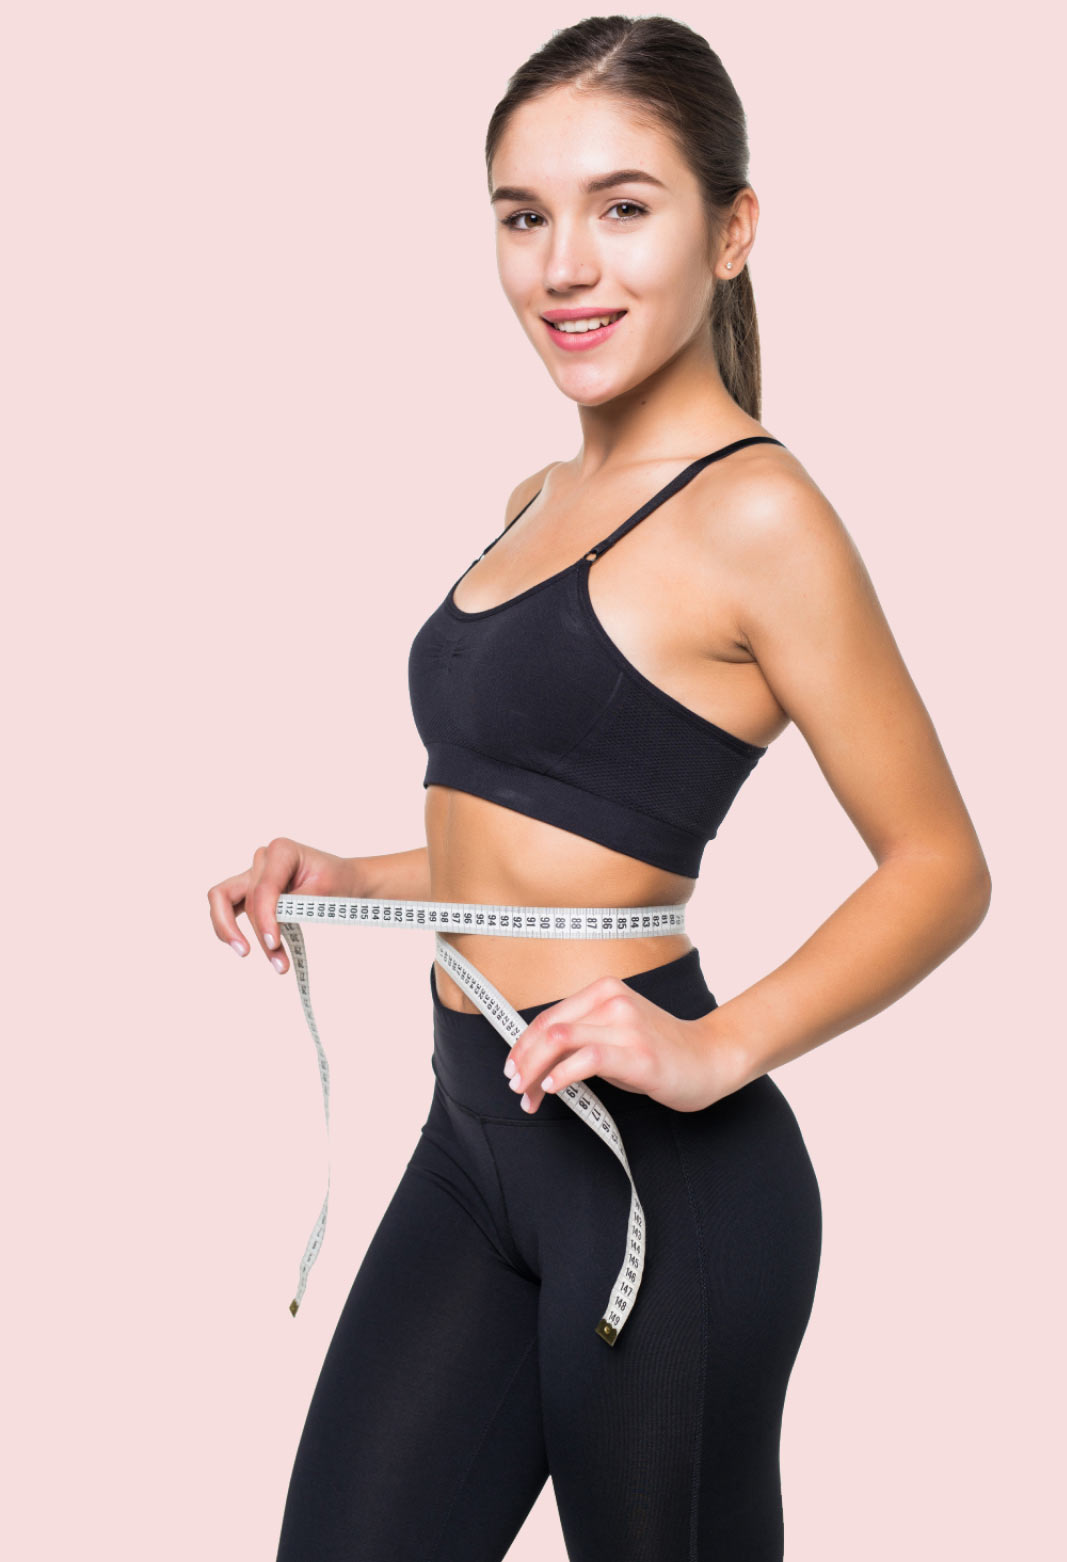 Long-term Effects of Coolsculpting, Beverly Hills, Los Angeles